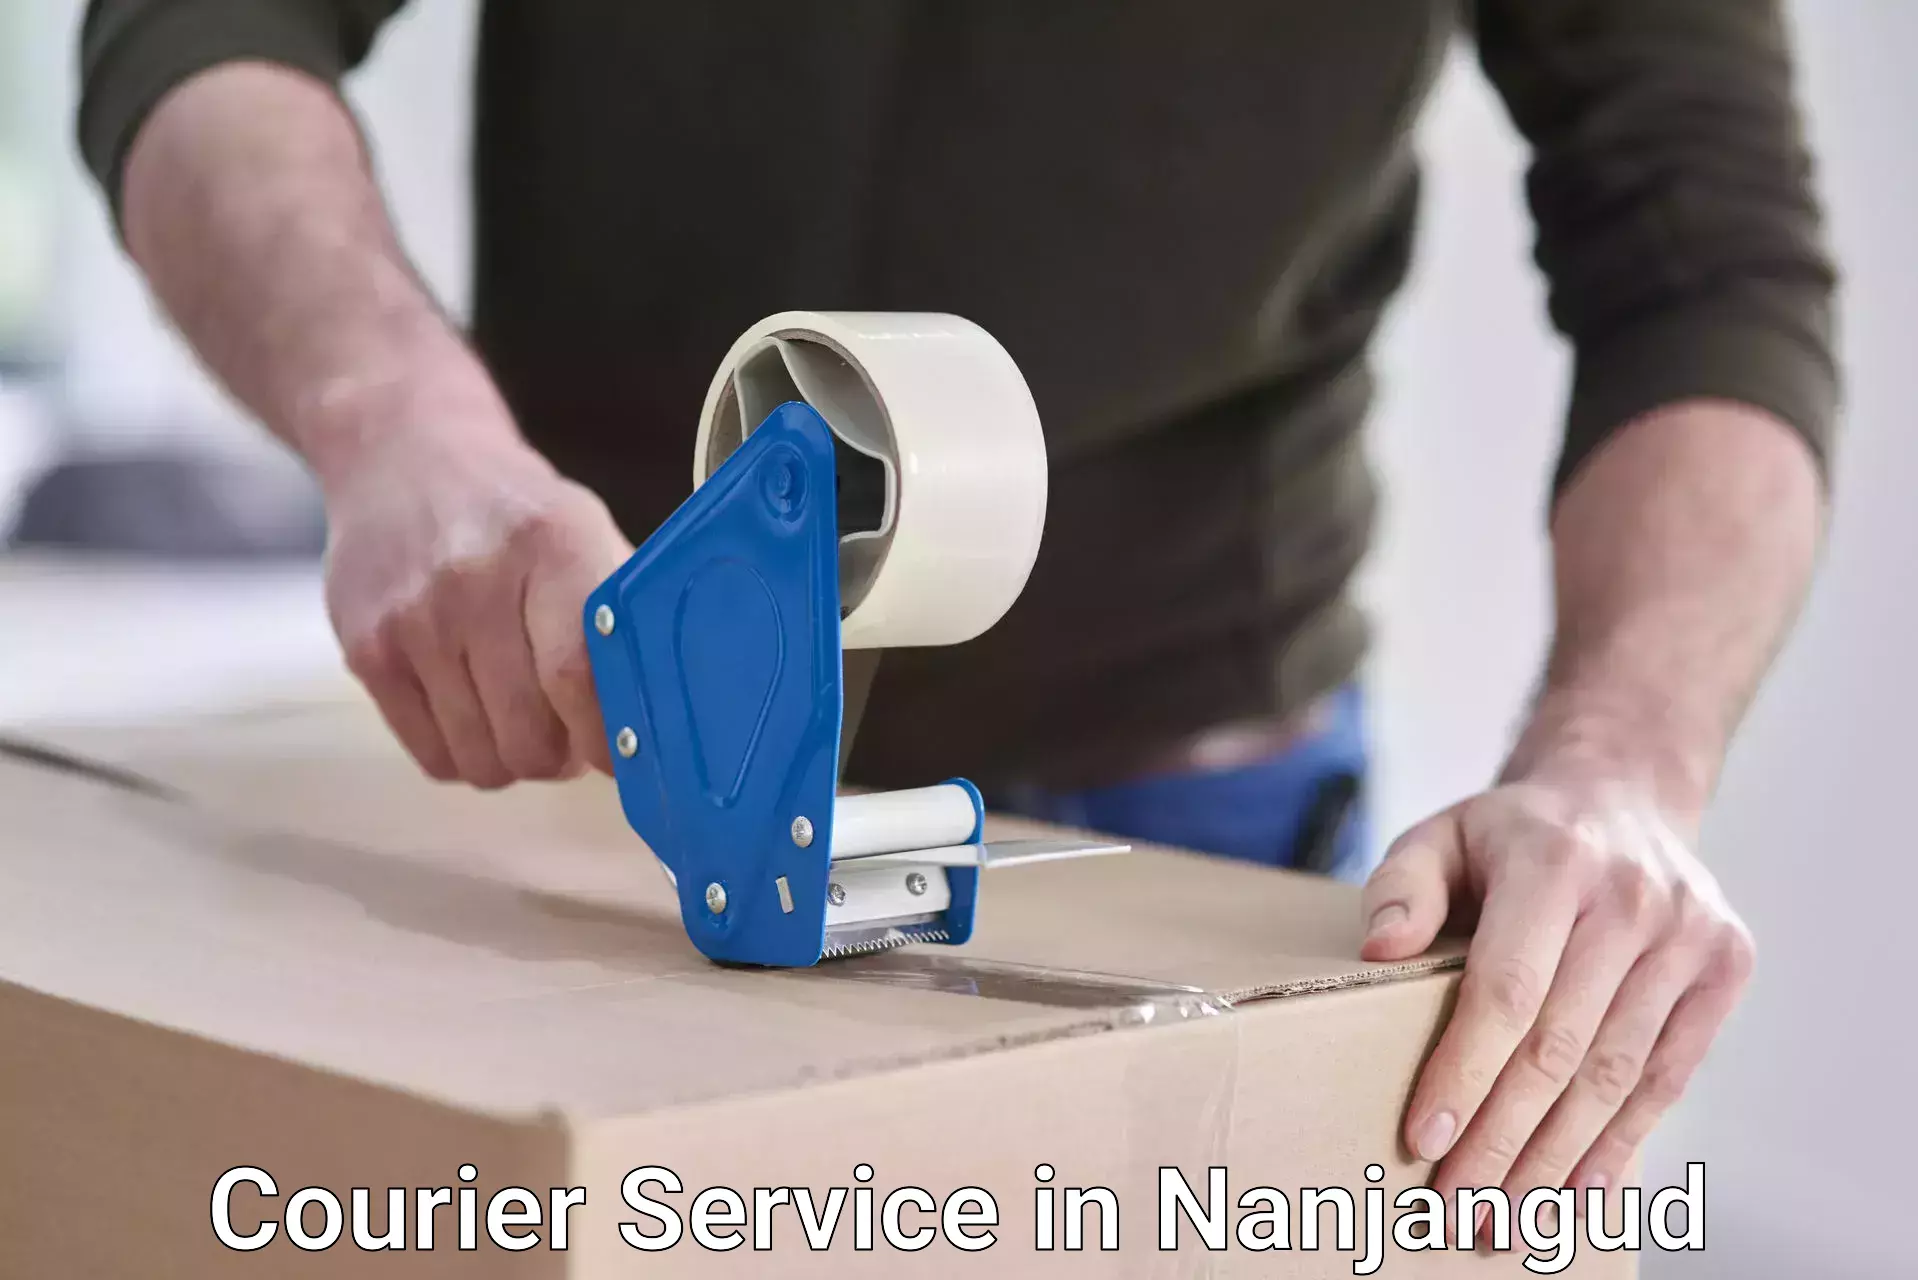 Customer-friendly courier services in Nanjangud